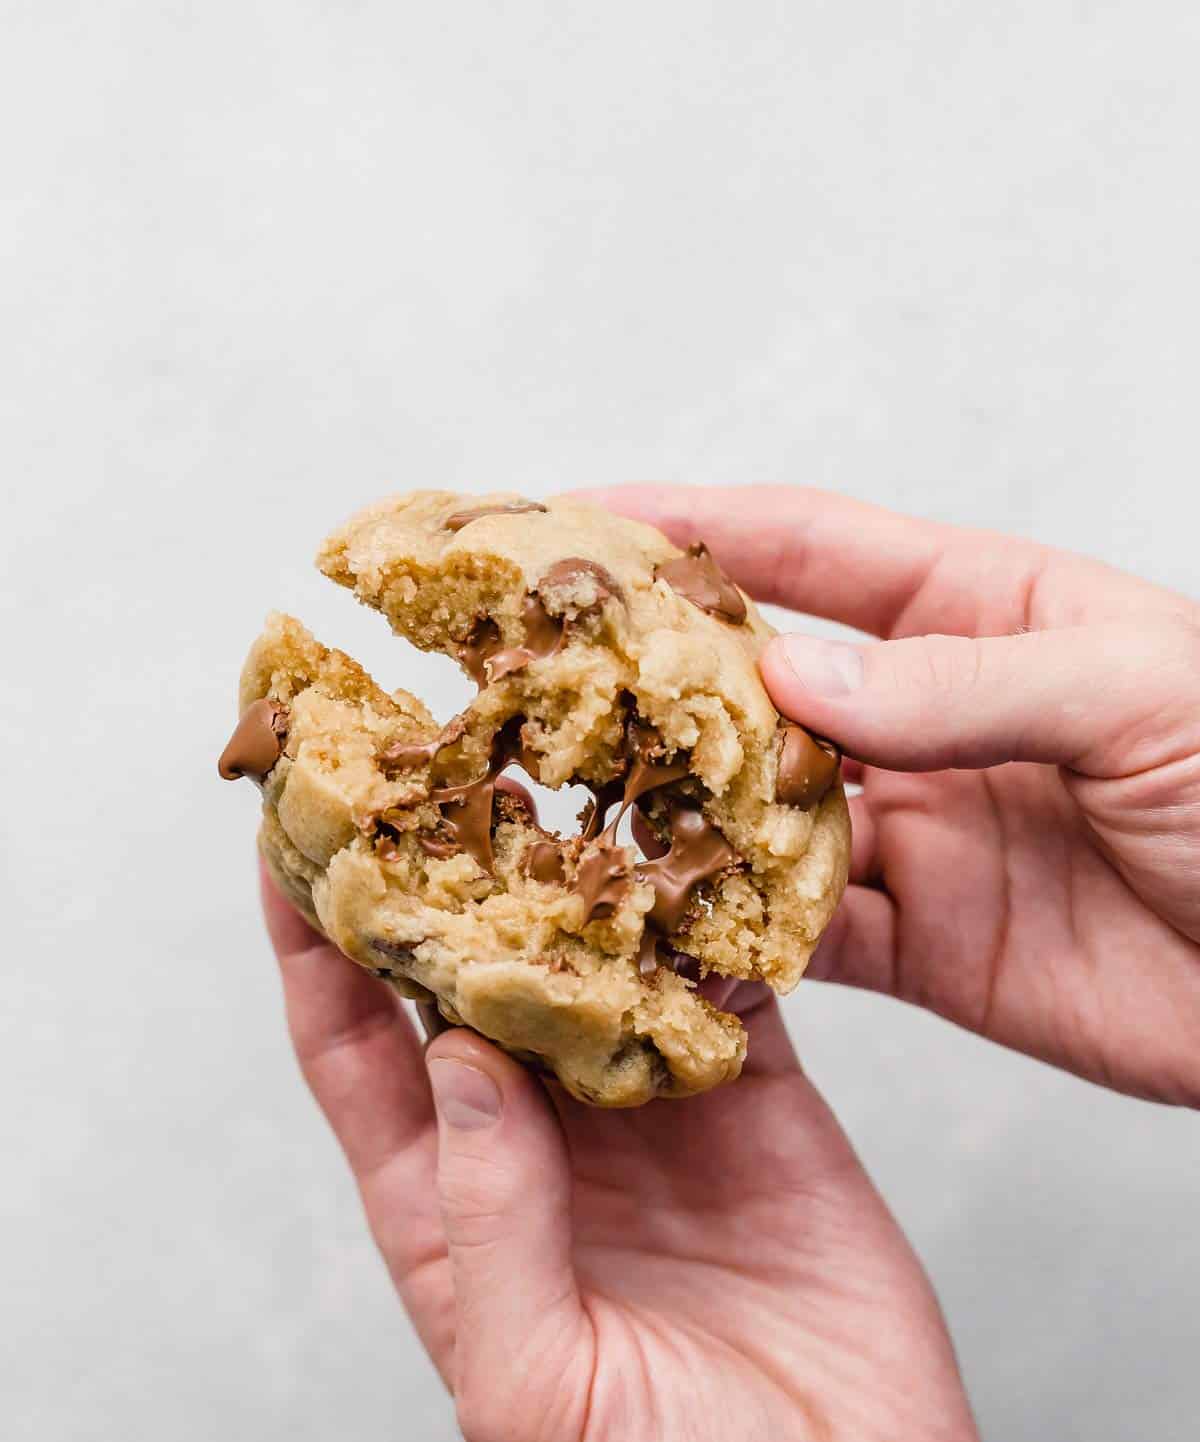 A pair of male hands holding a Crumbl Chocolate Chip Cookie and splitting it in half.